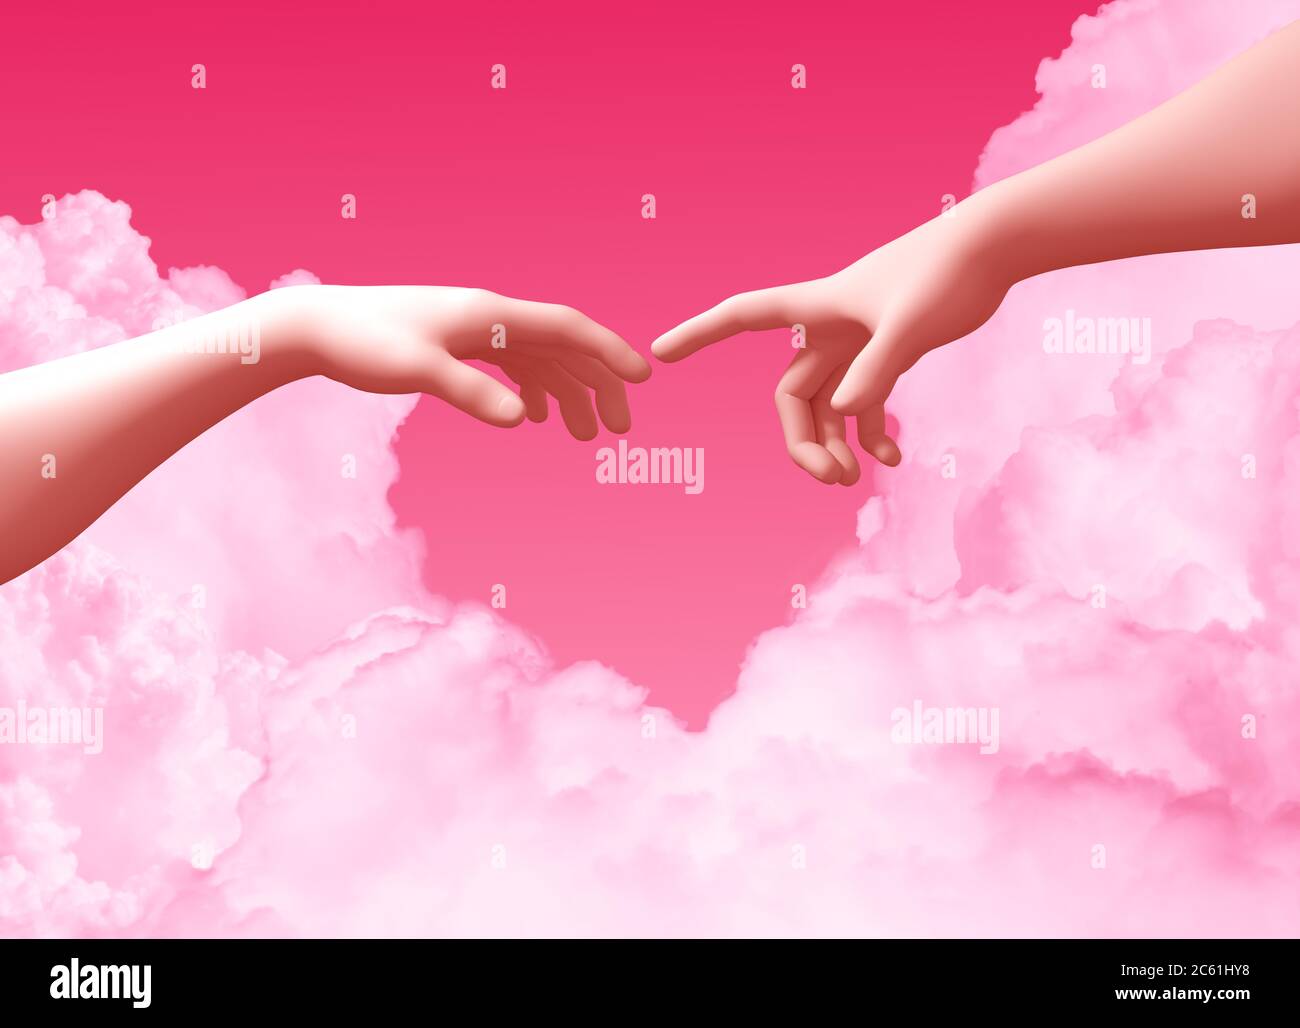 Two Hands And Clouds On Pink Background Create A Heart Shape Stock Photo